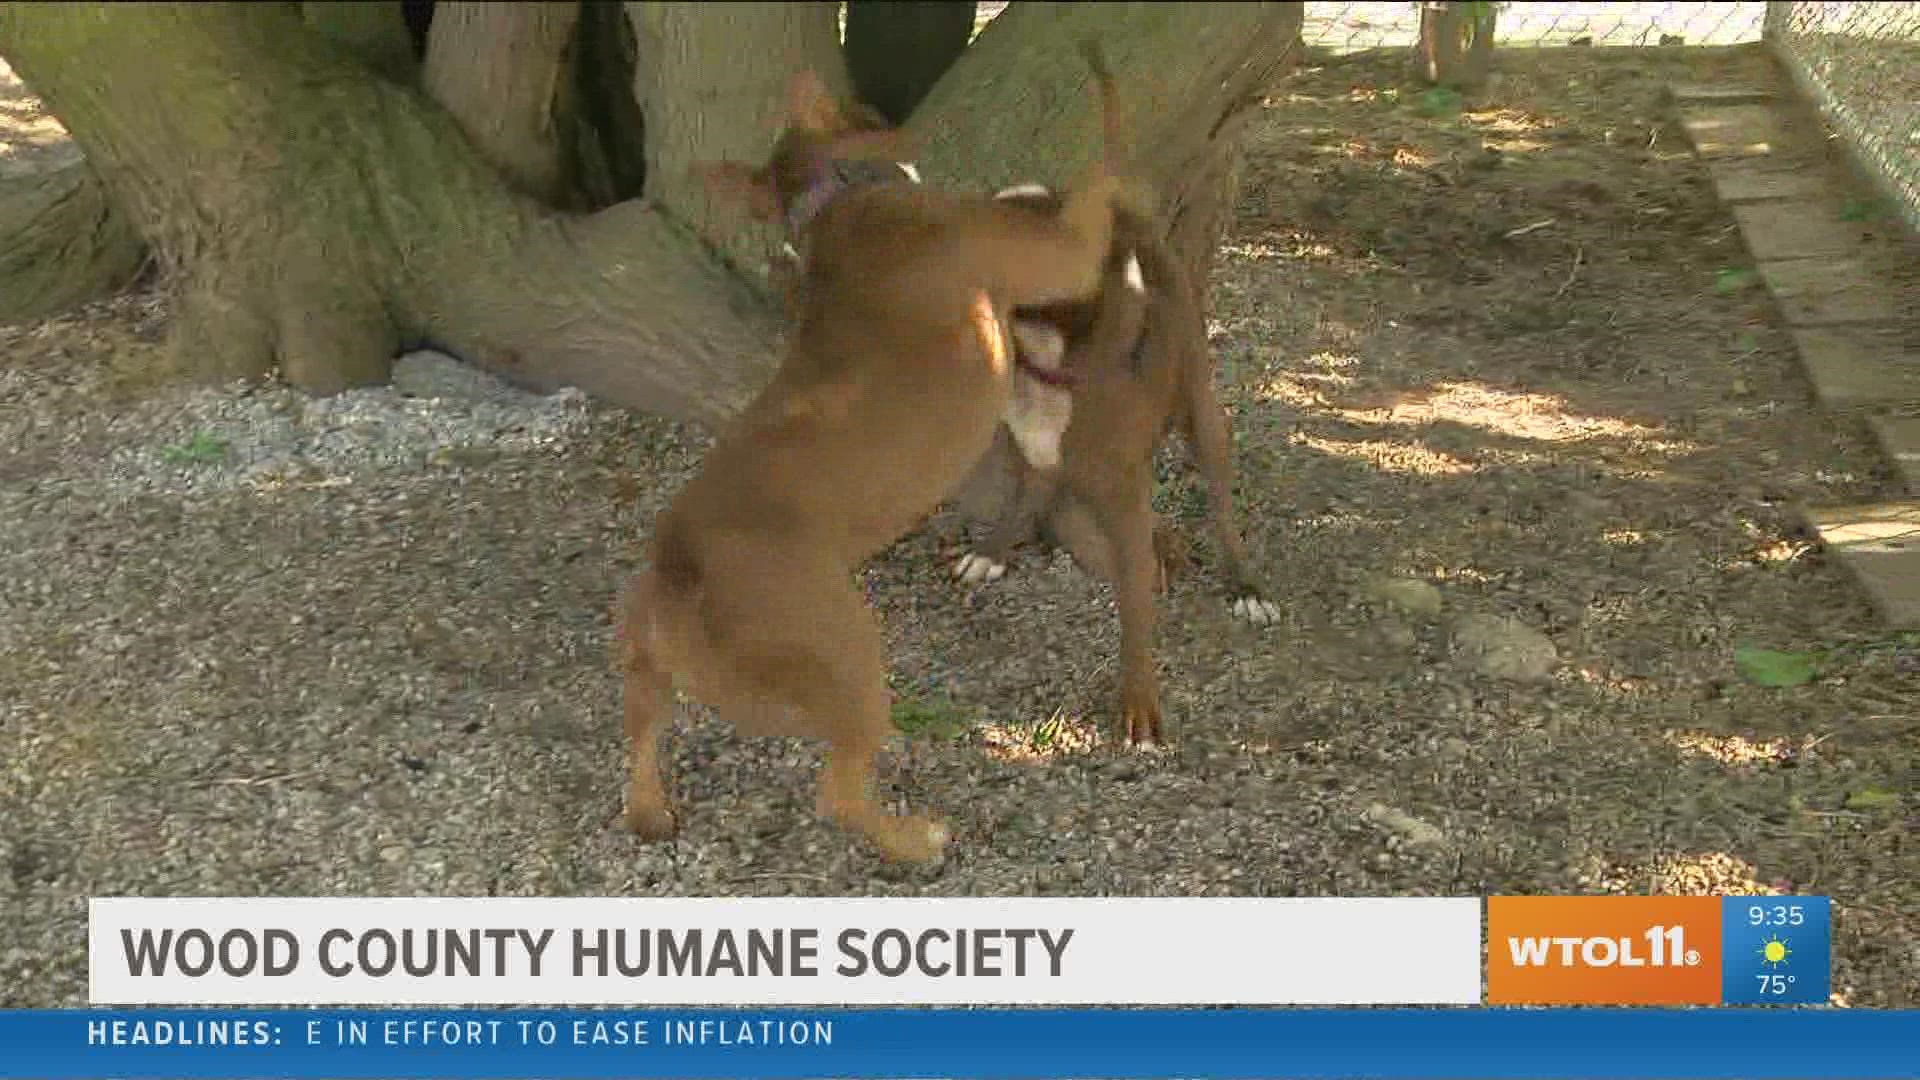 In addition to adoption, the Wood County Humane Society's "Doggy Day Out" program allows volunteers to take dogs out for walks for an afternoon.